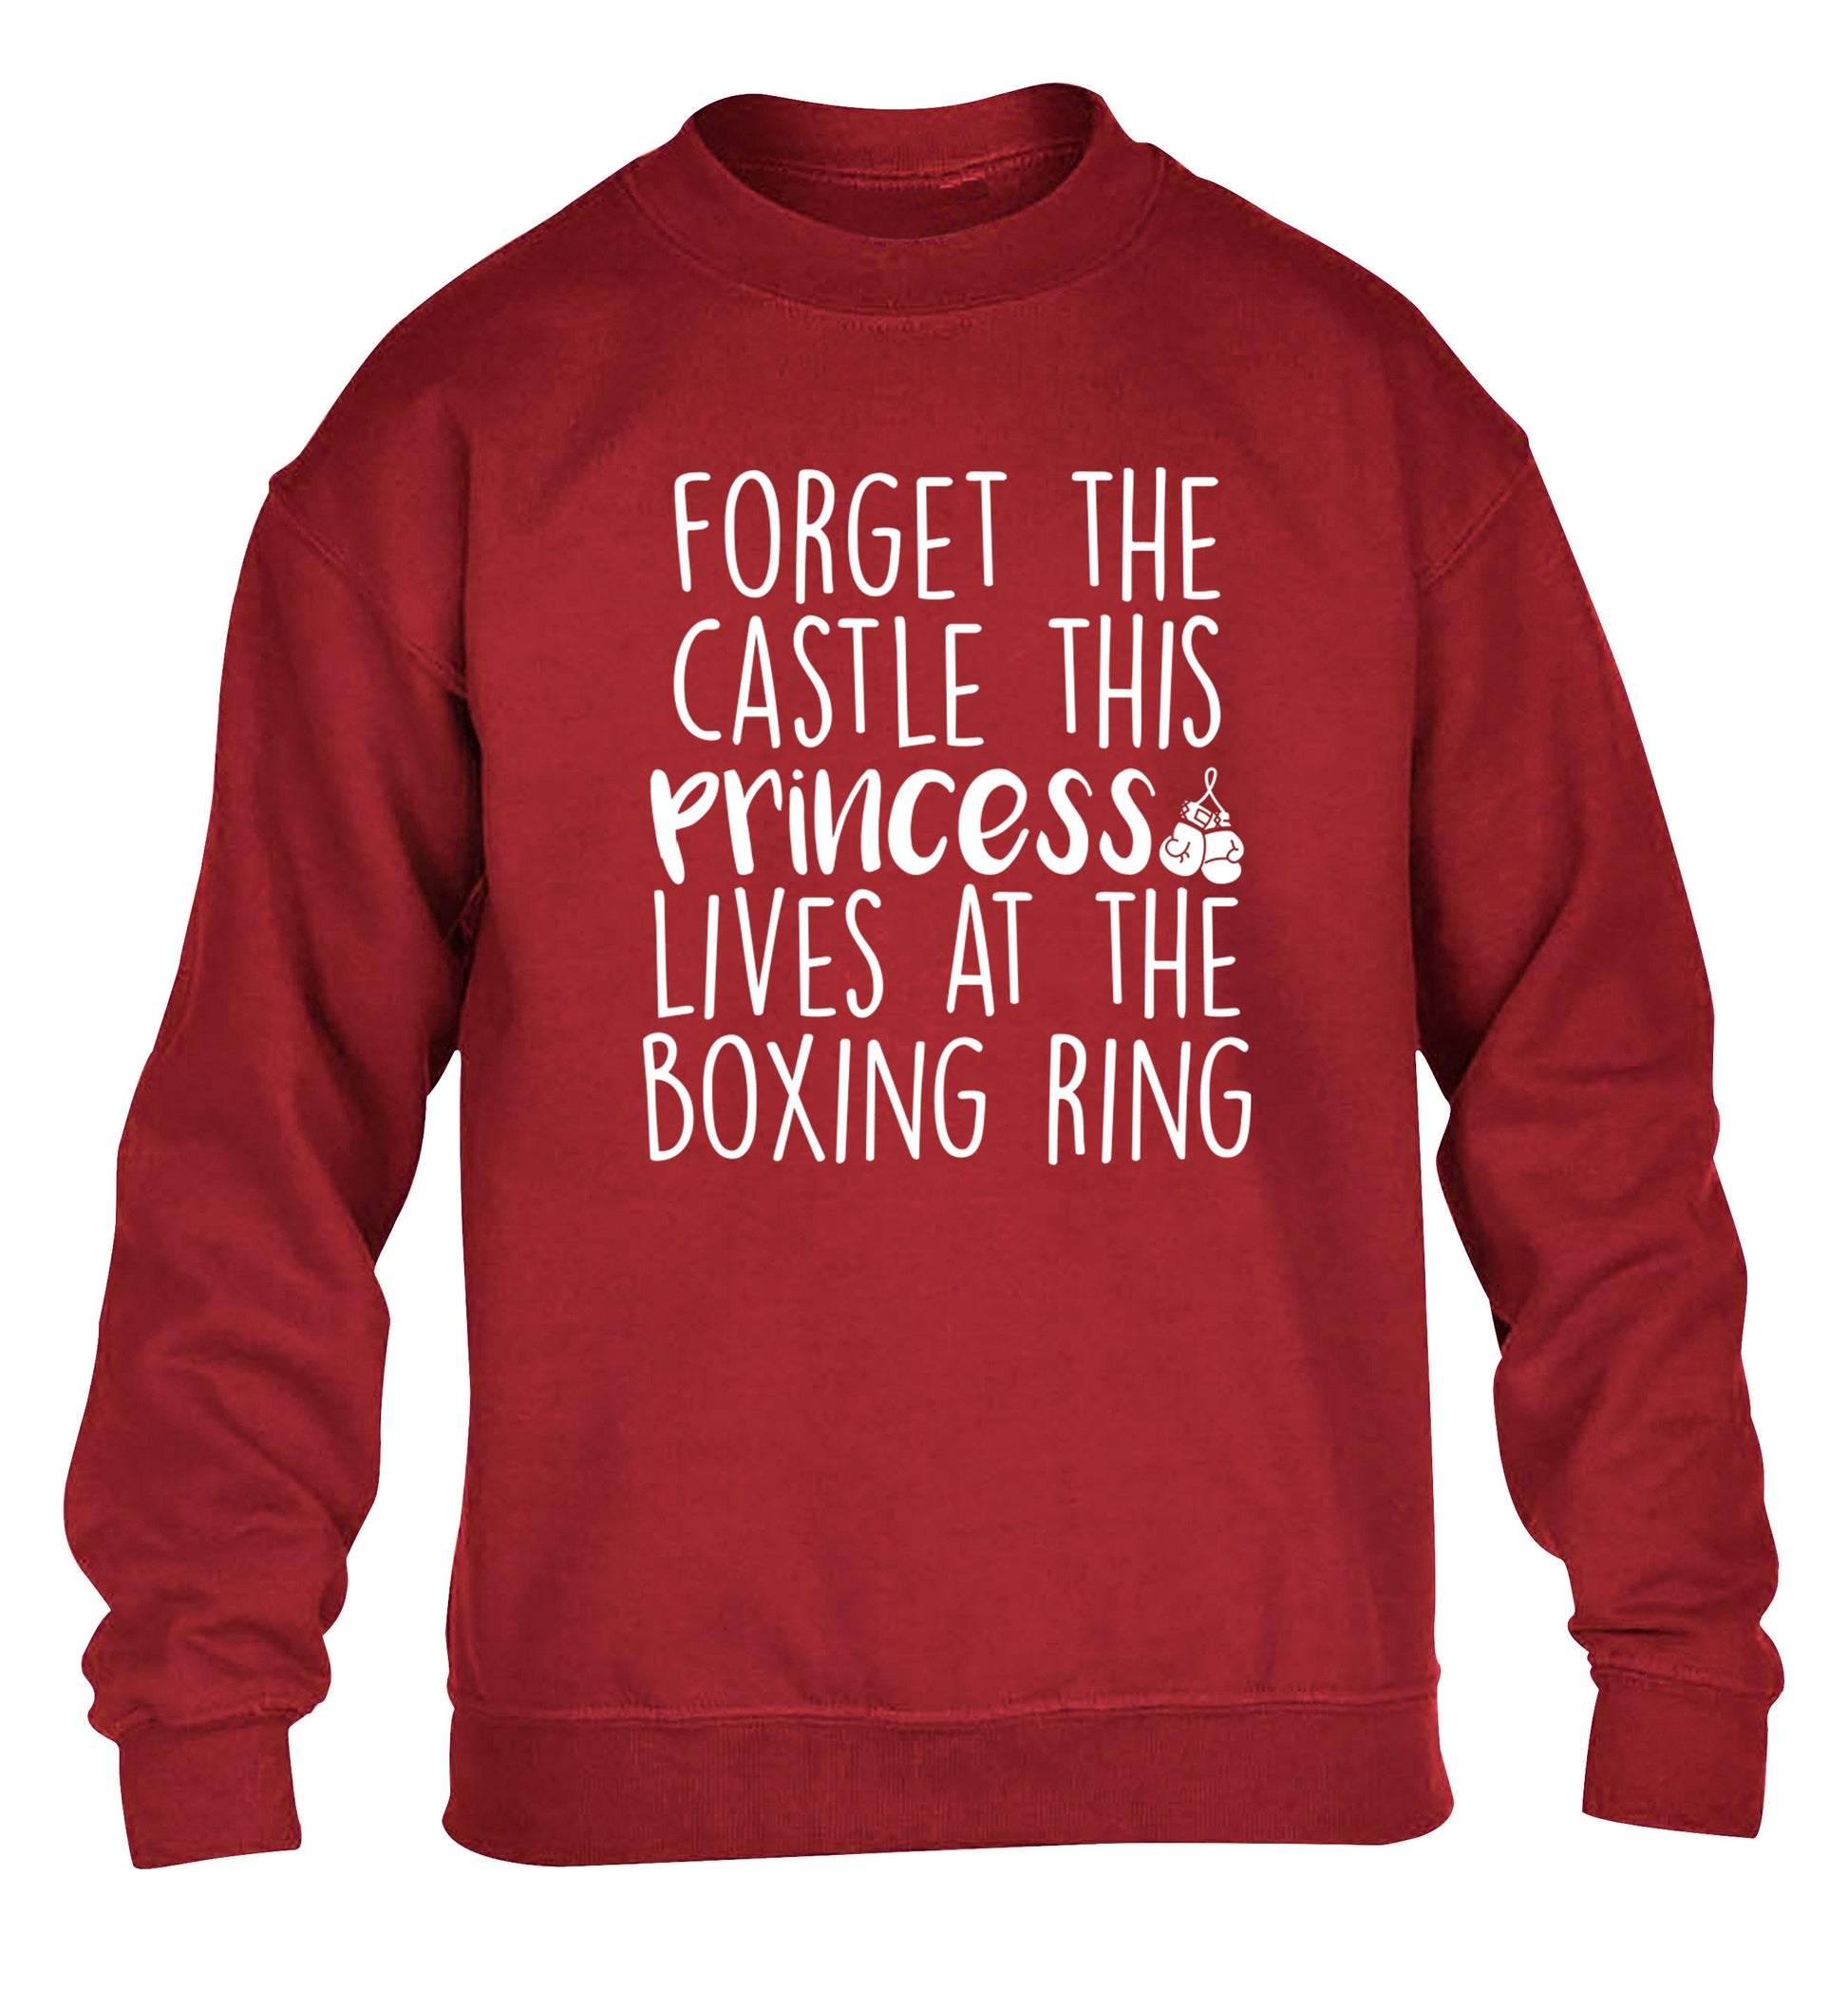 Forget the castle this princess lives at the boxing ring children's grey sweater 12-14 Years